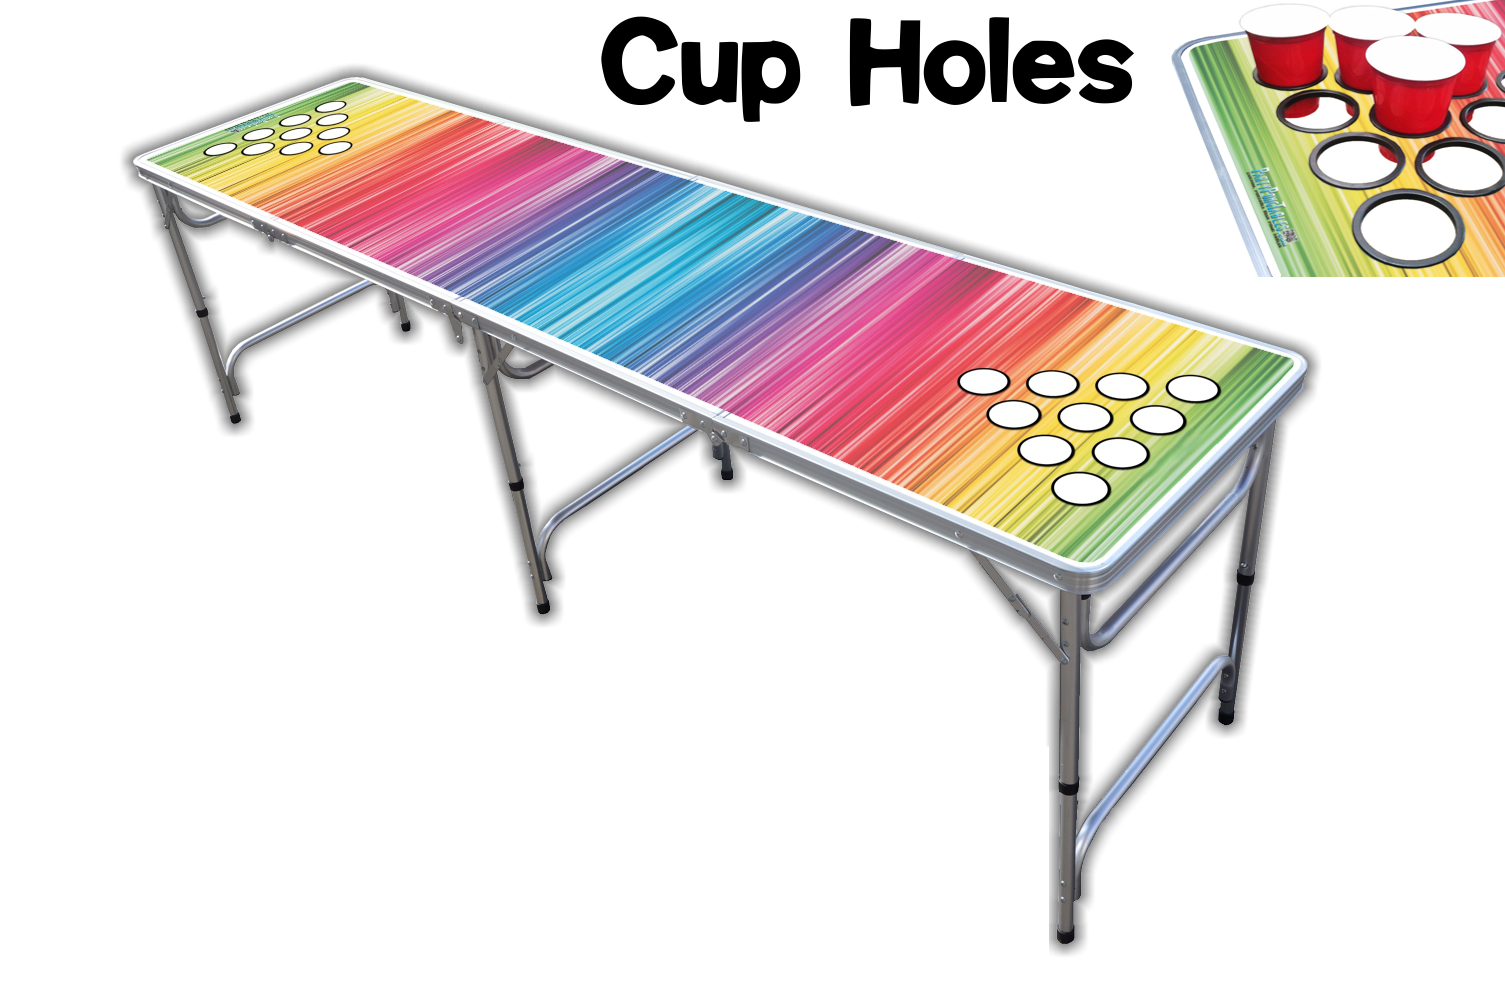 8-Foot Professional Beer Pong Table w/ Cup Holes - Splash Edition